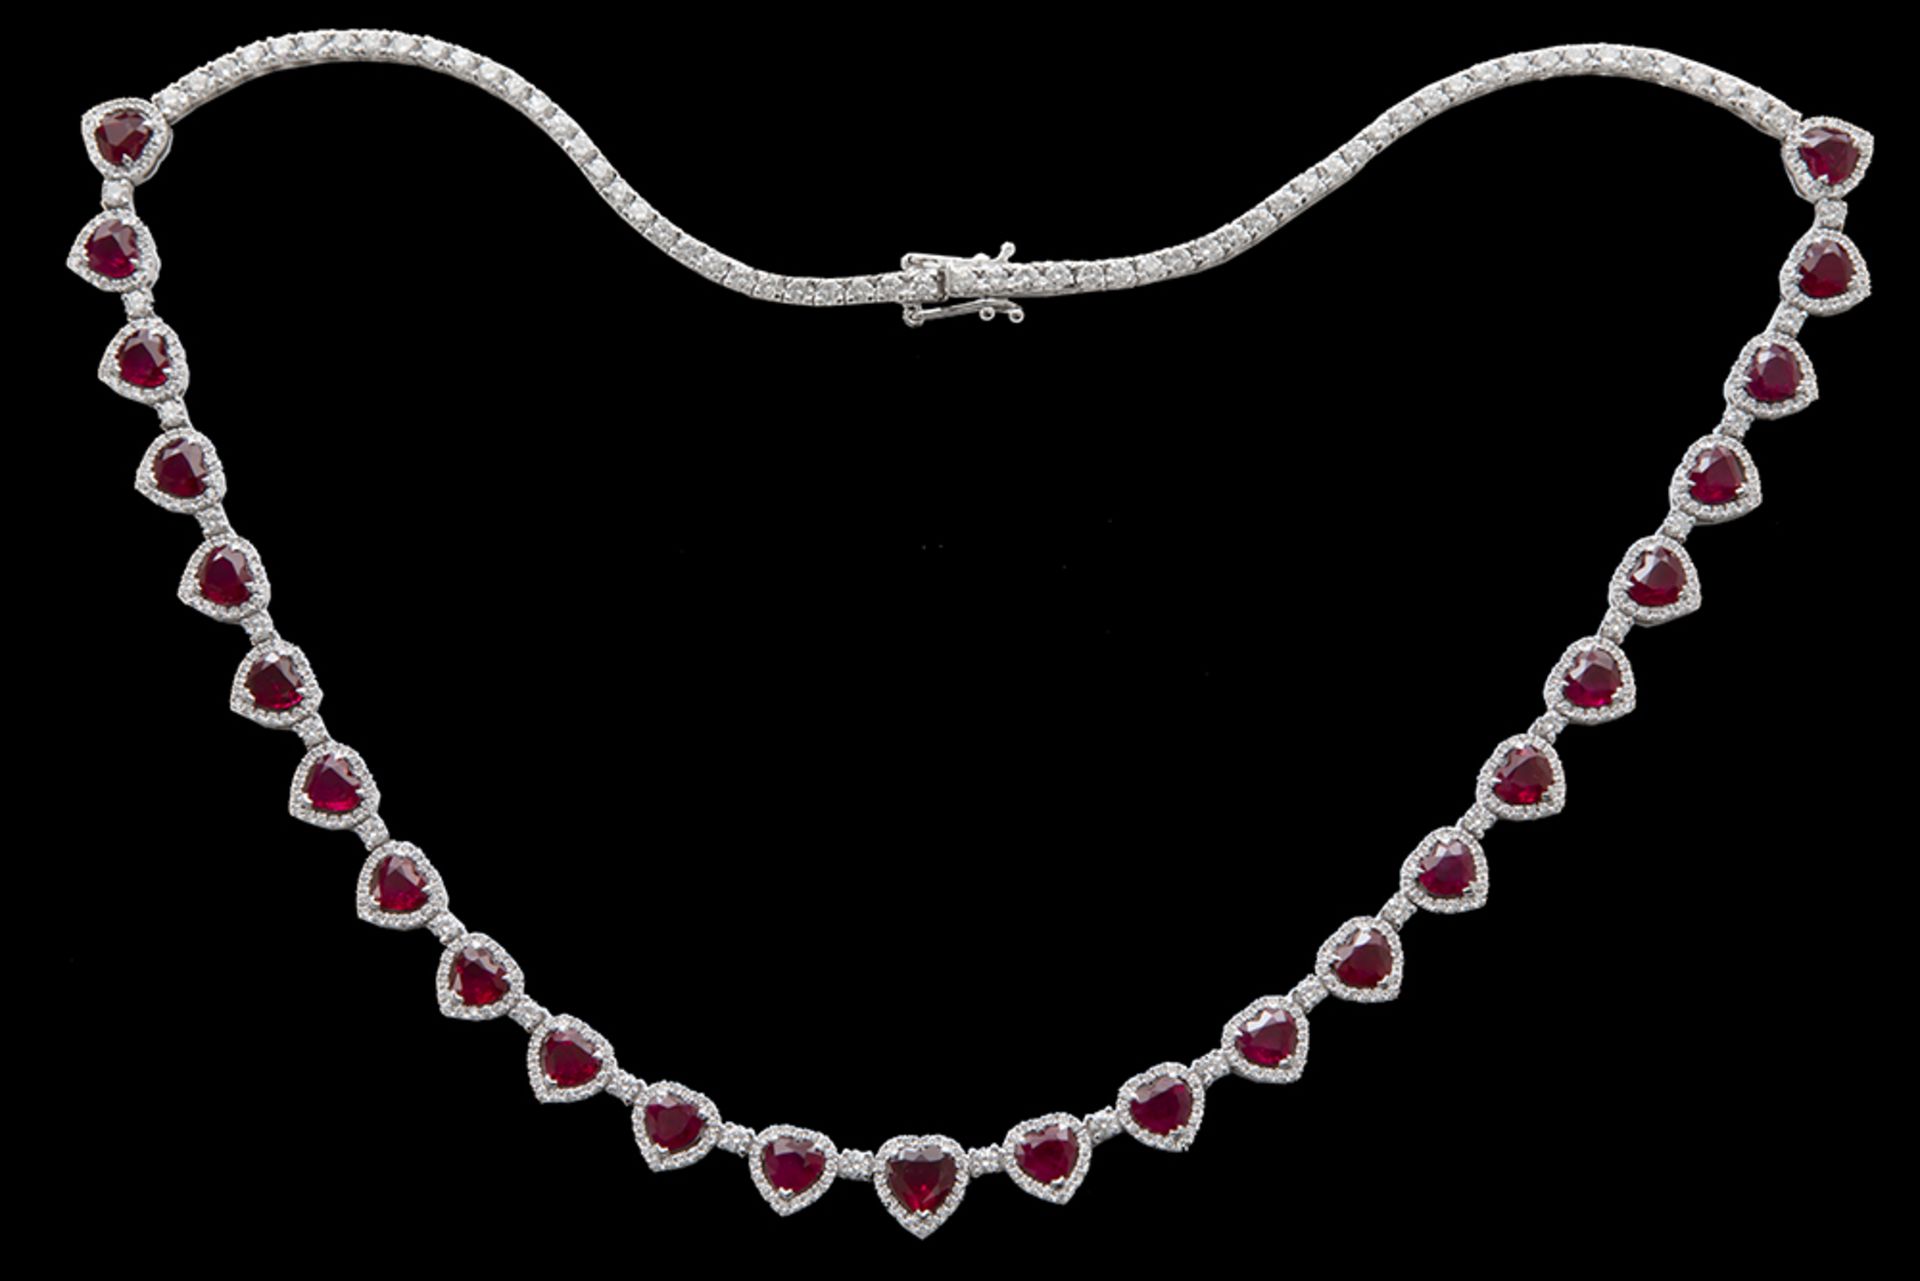 superb necklace in white gold (18 carat) with 18 carat of high quality "pigeon blood" rubies and 6,